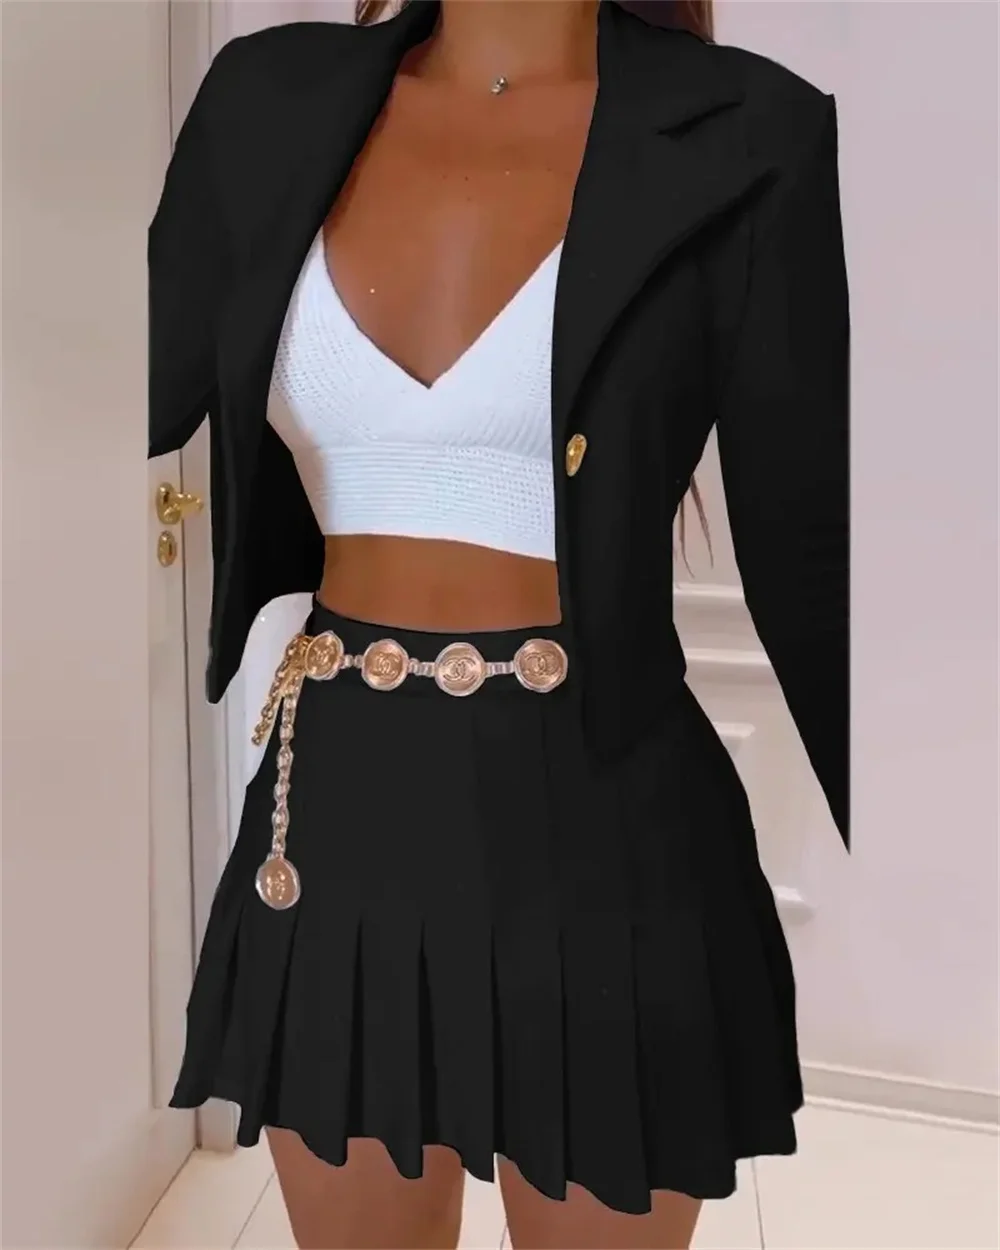 2023 New in Women Dresses Sets Long sleeves Blazers + Mini Skirt Suit Female Clothes Fashion Office Lady Formal Two Pieces Set